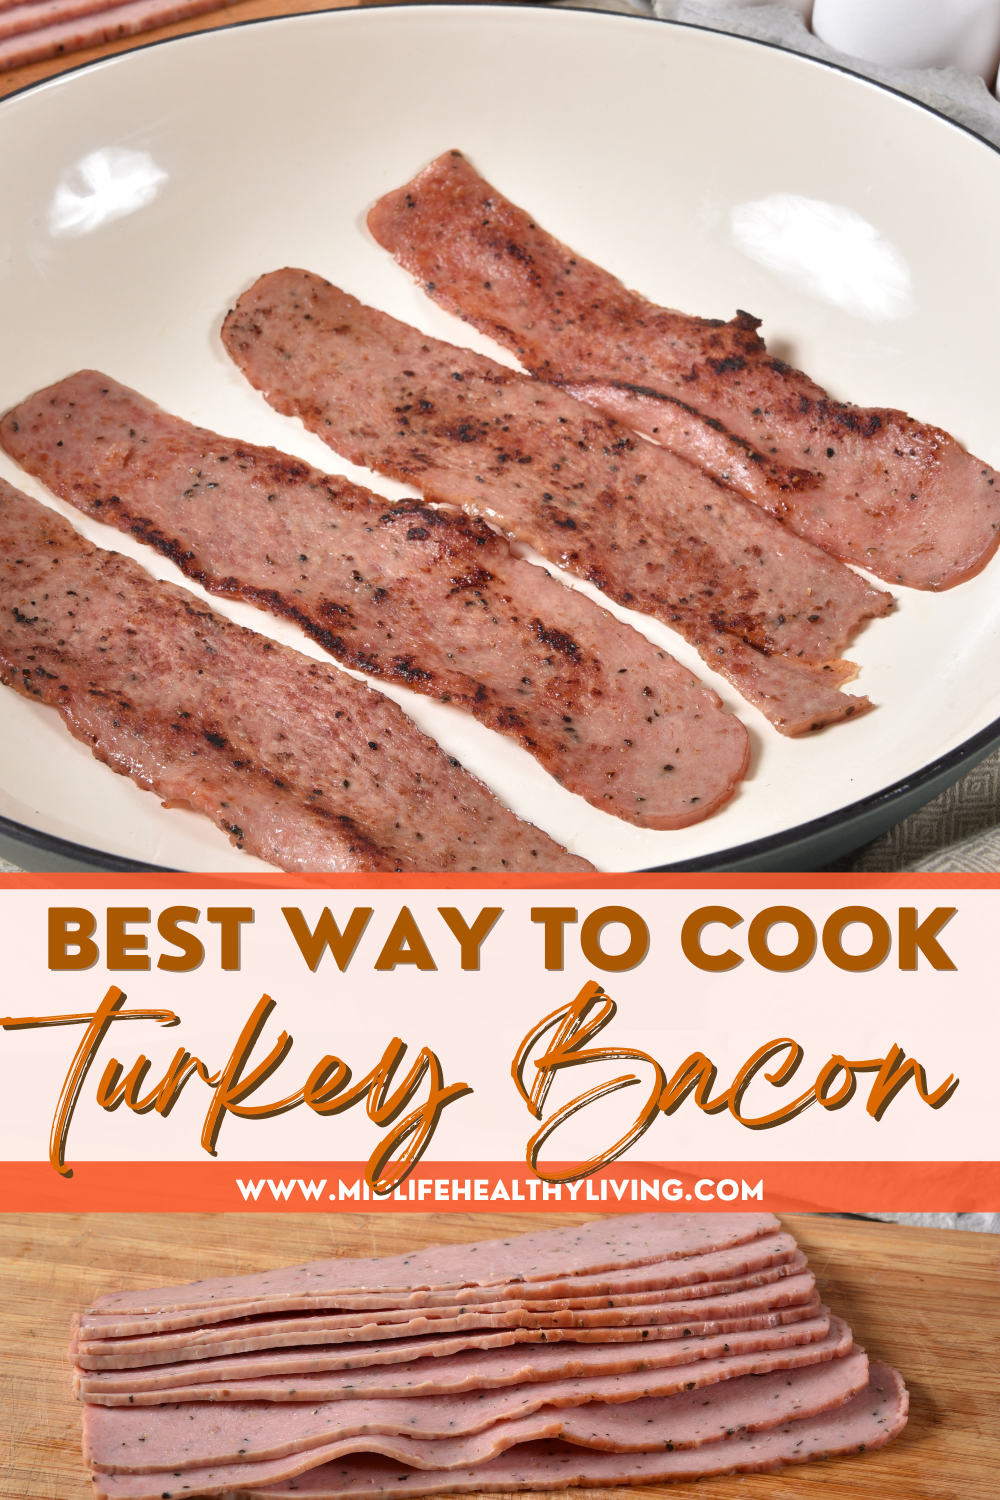 Pin showing the title Best Way to Cook Turkey Bacon